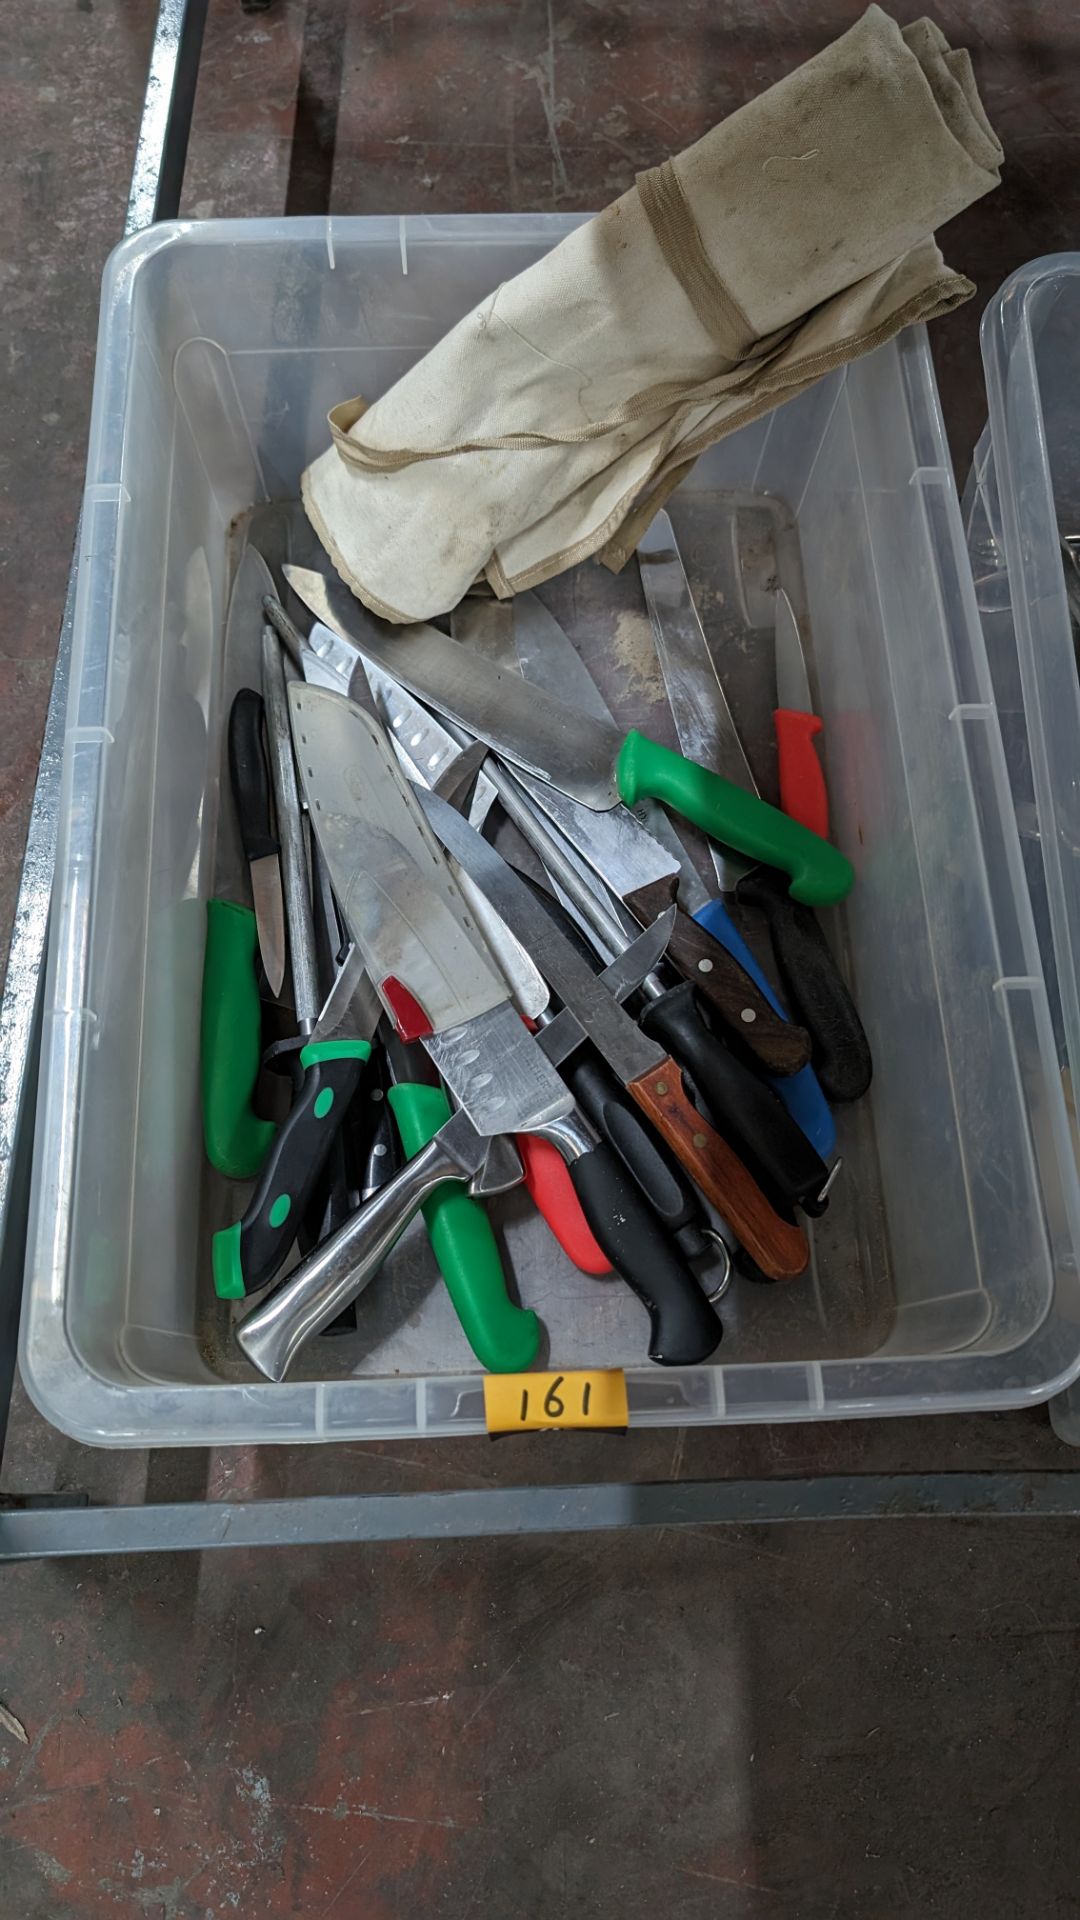 The contents of a crate of chef's knives